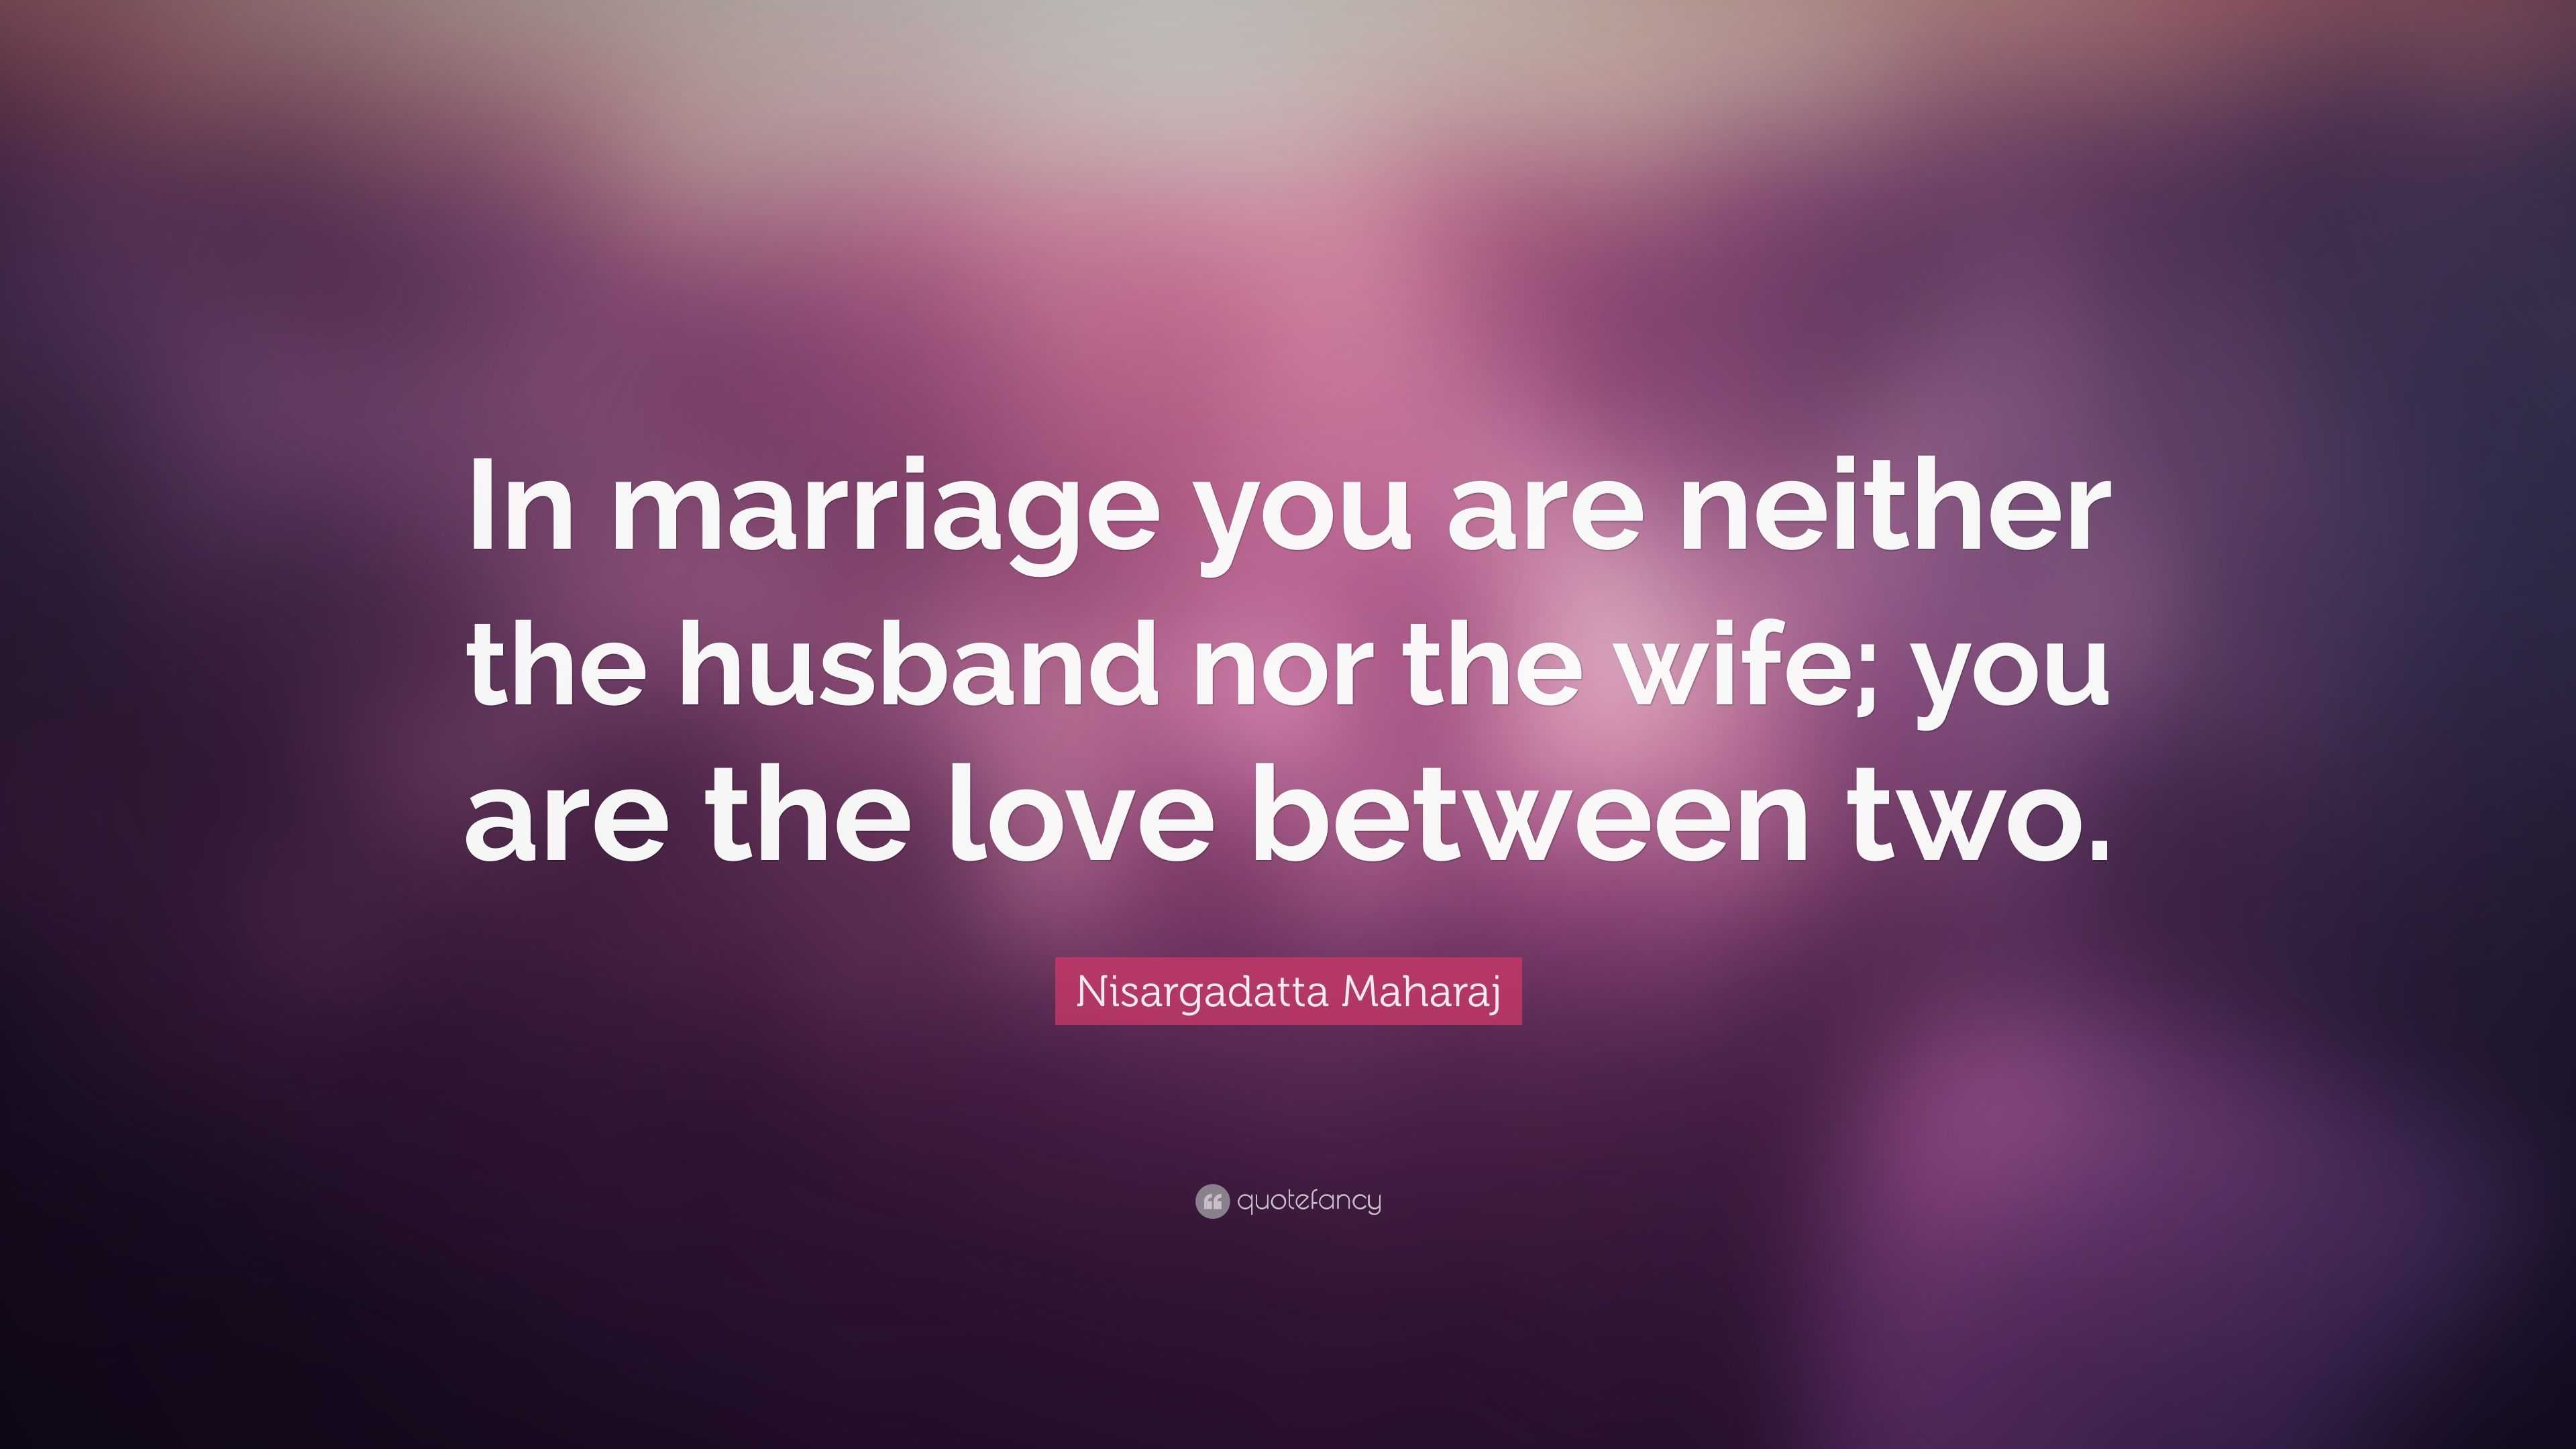 Nisargadatta Maharaj Quote “In marriage you are neither the husband nor the wife